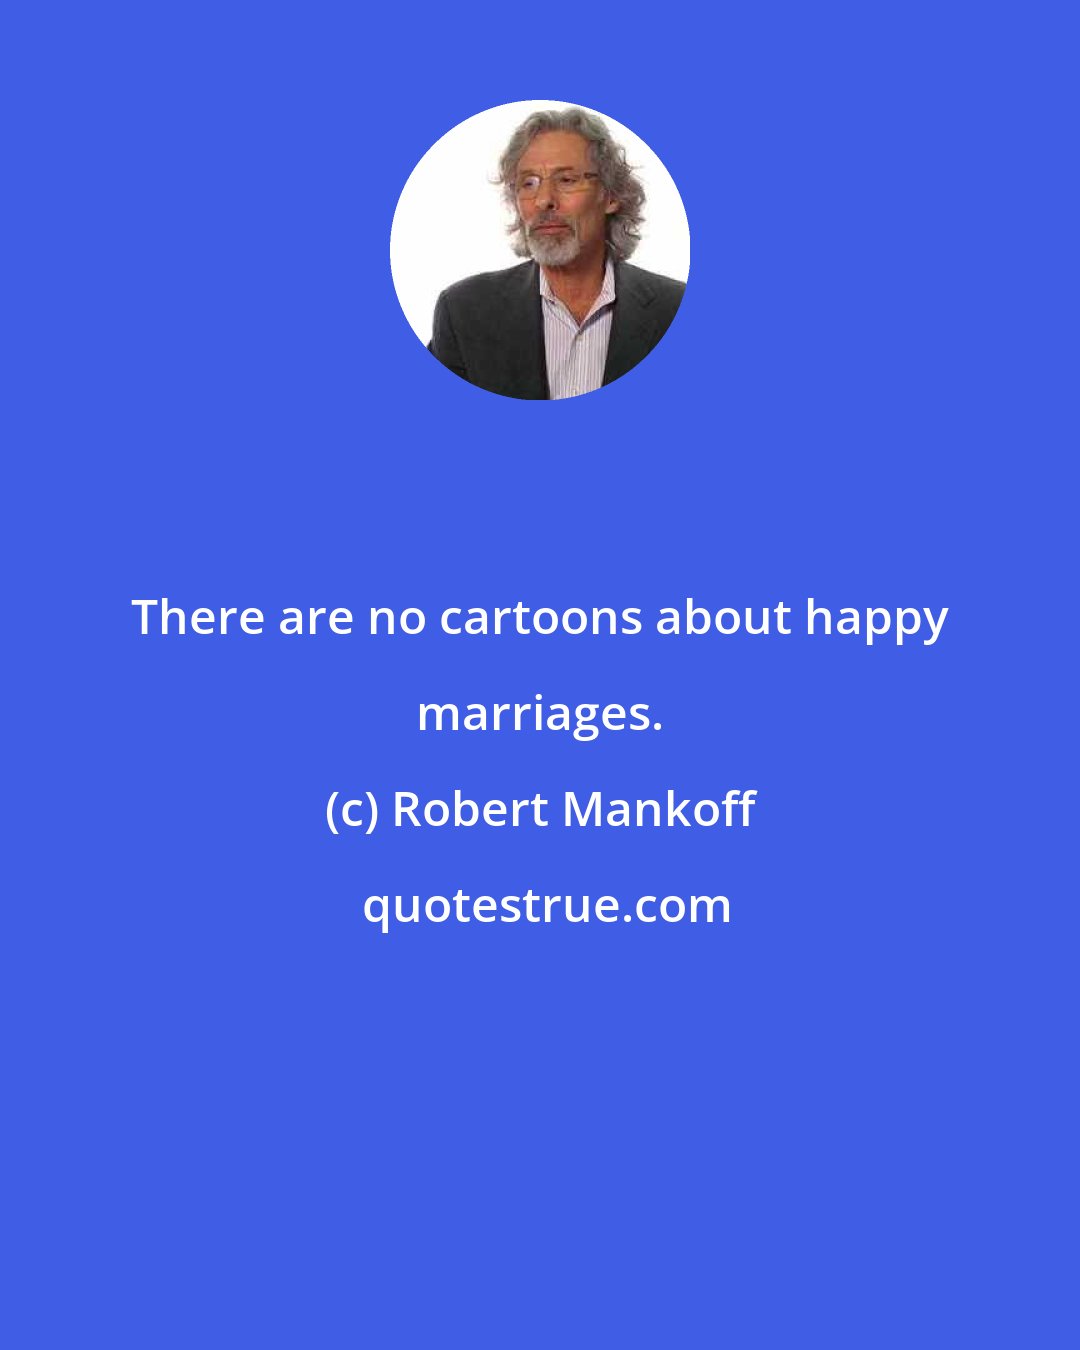 Robert Mankoff: There are no cartoons about happy marriages.